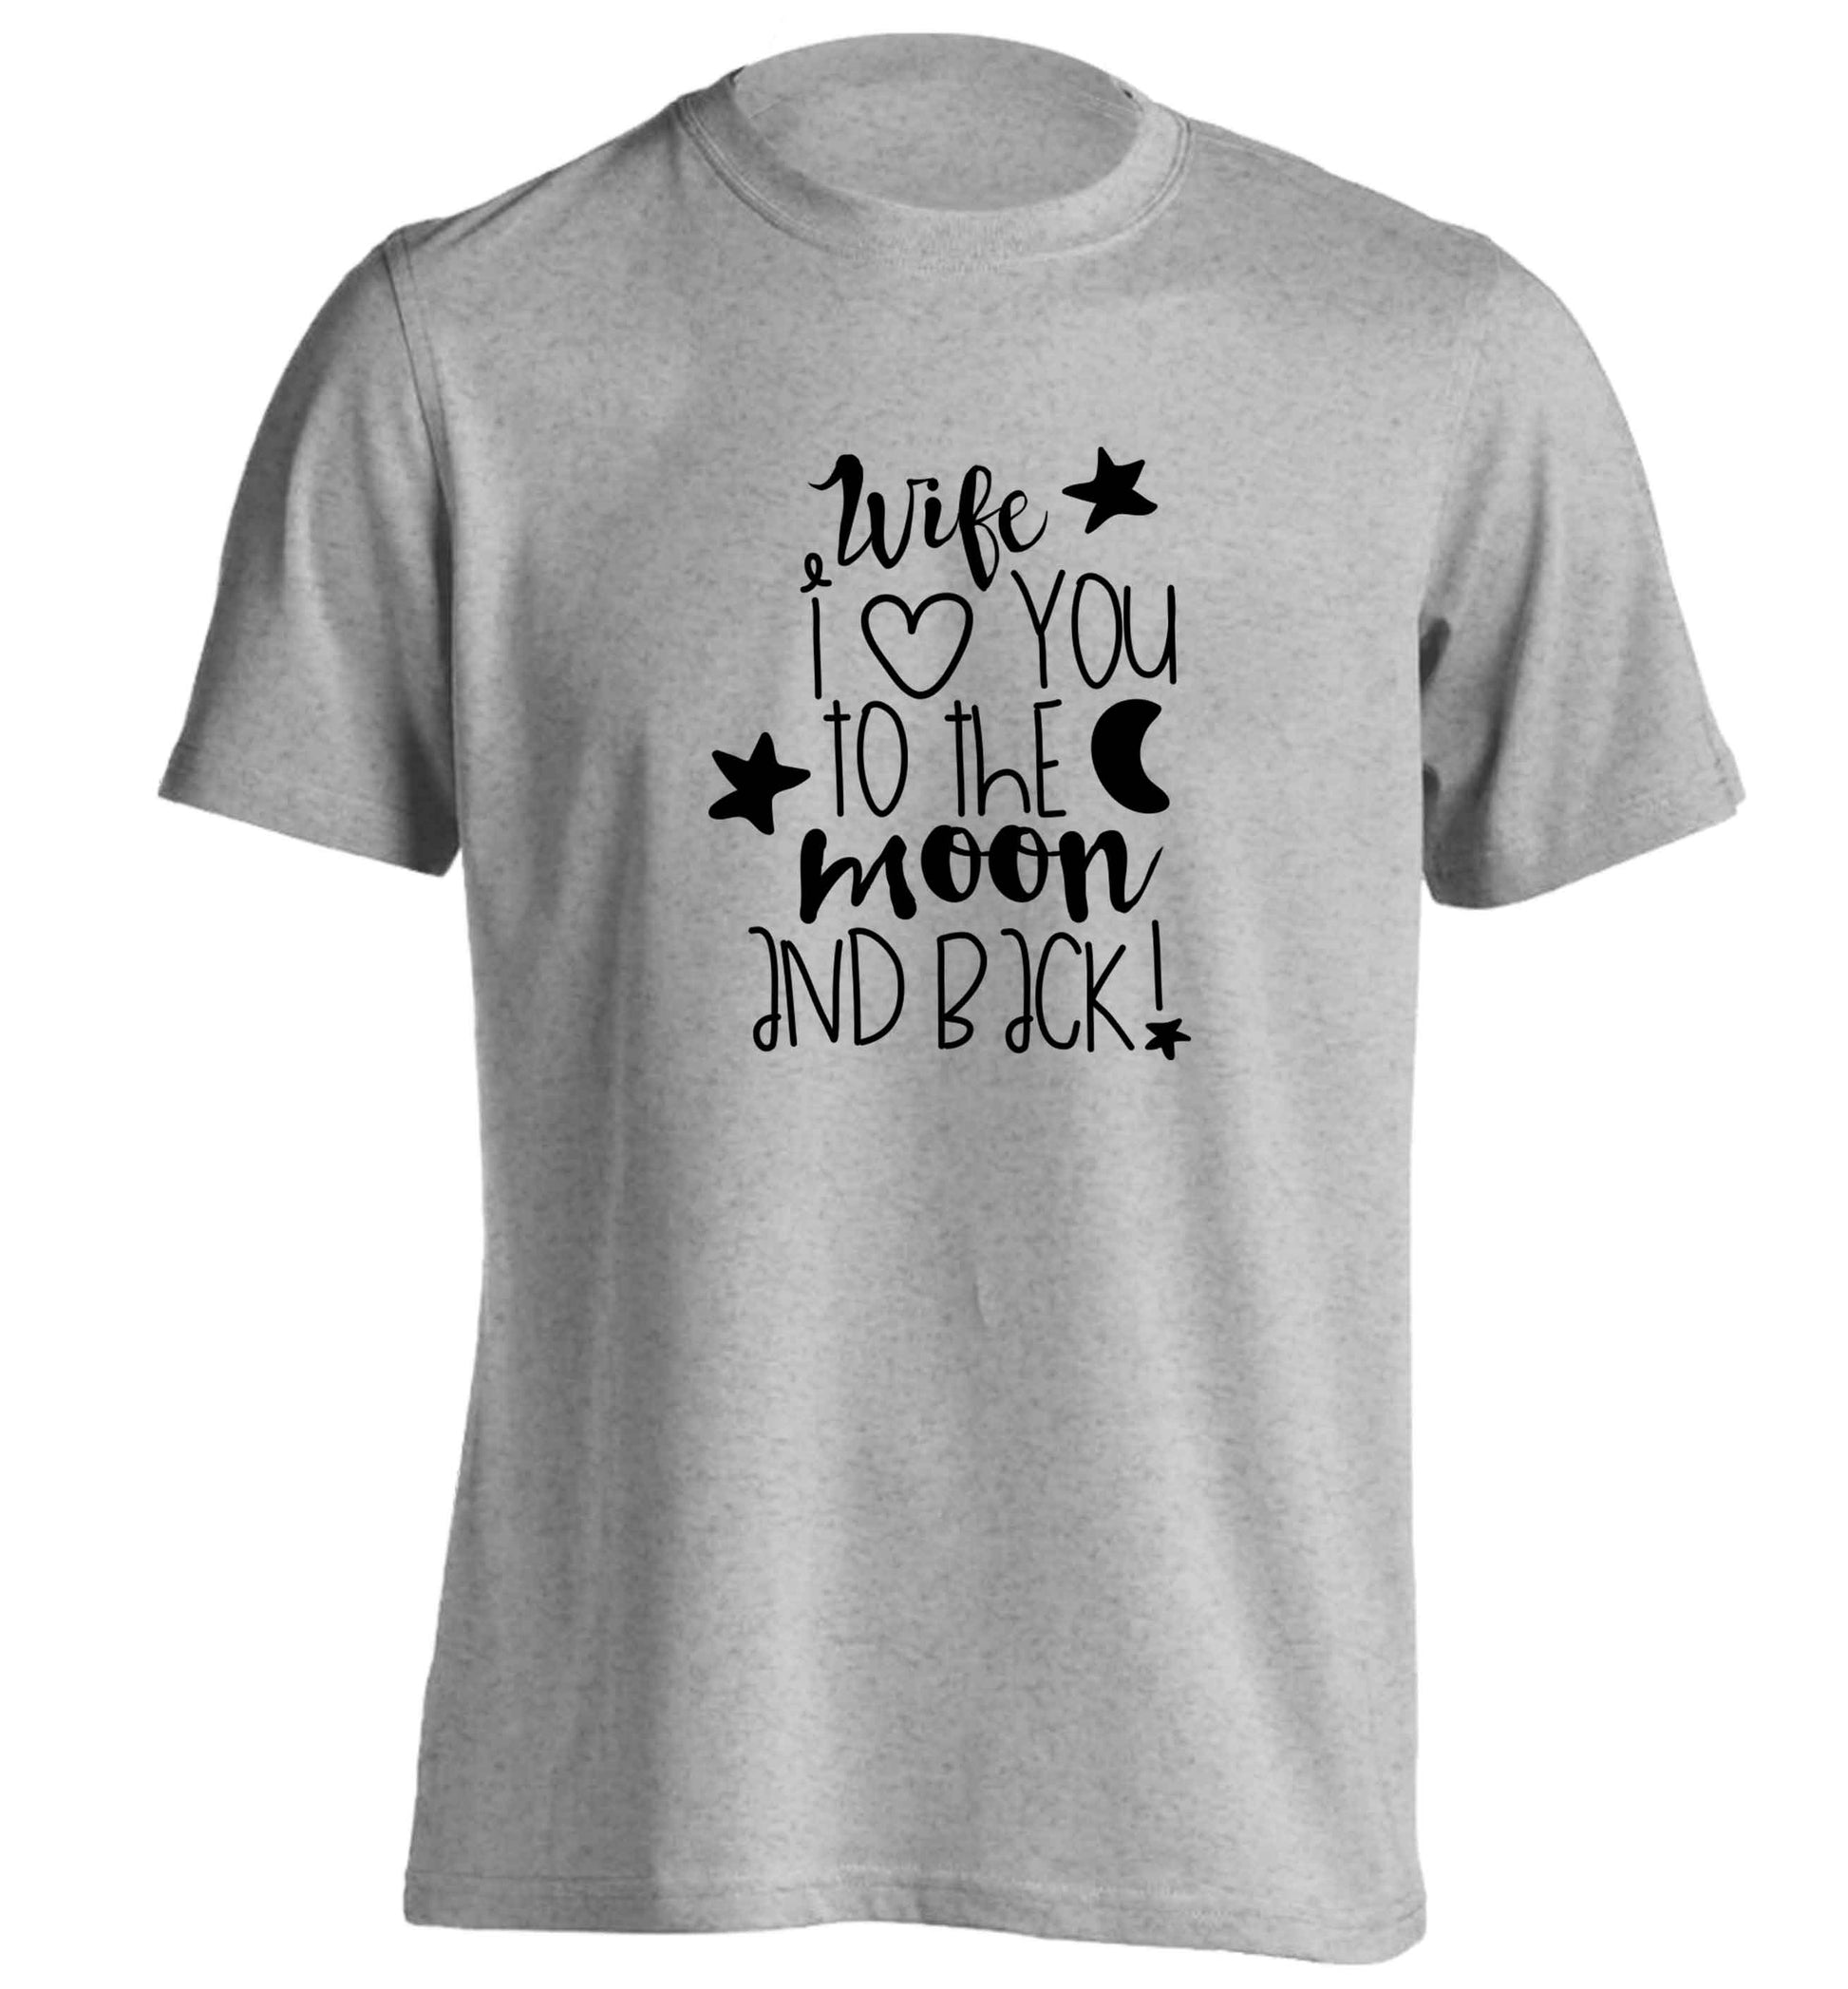 Wife I love you to the moon and back adults unisex grey Tshirt 2XL